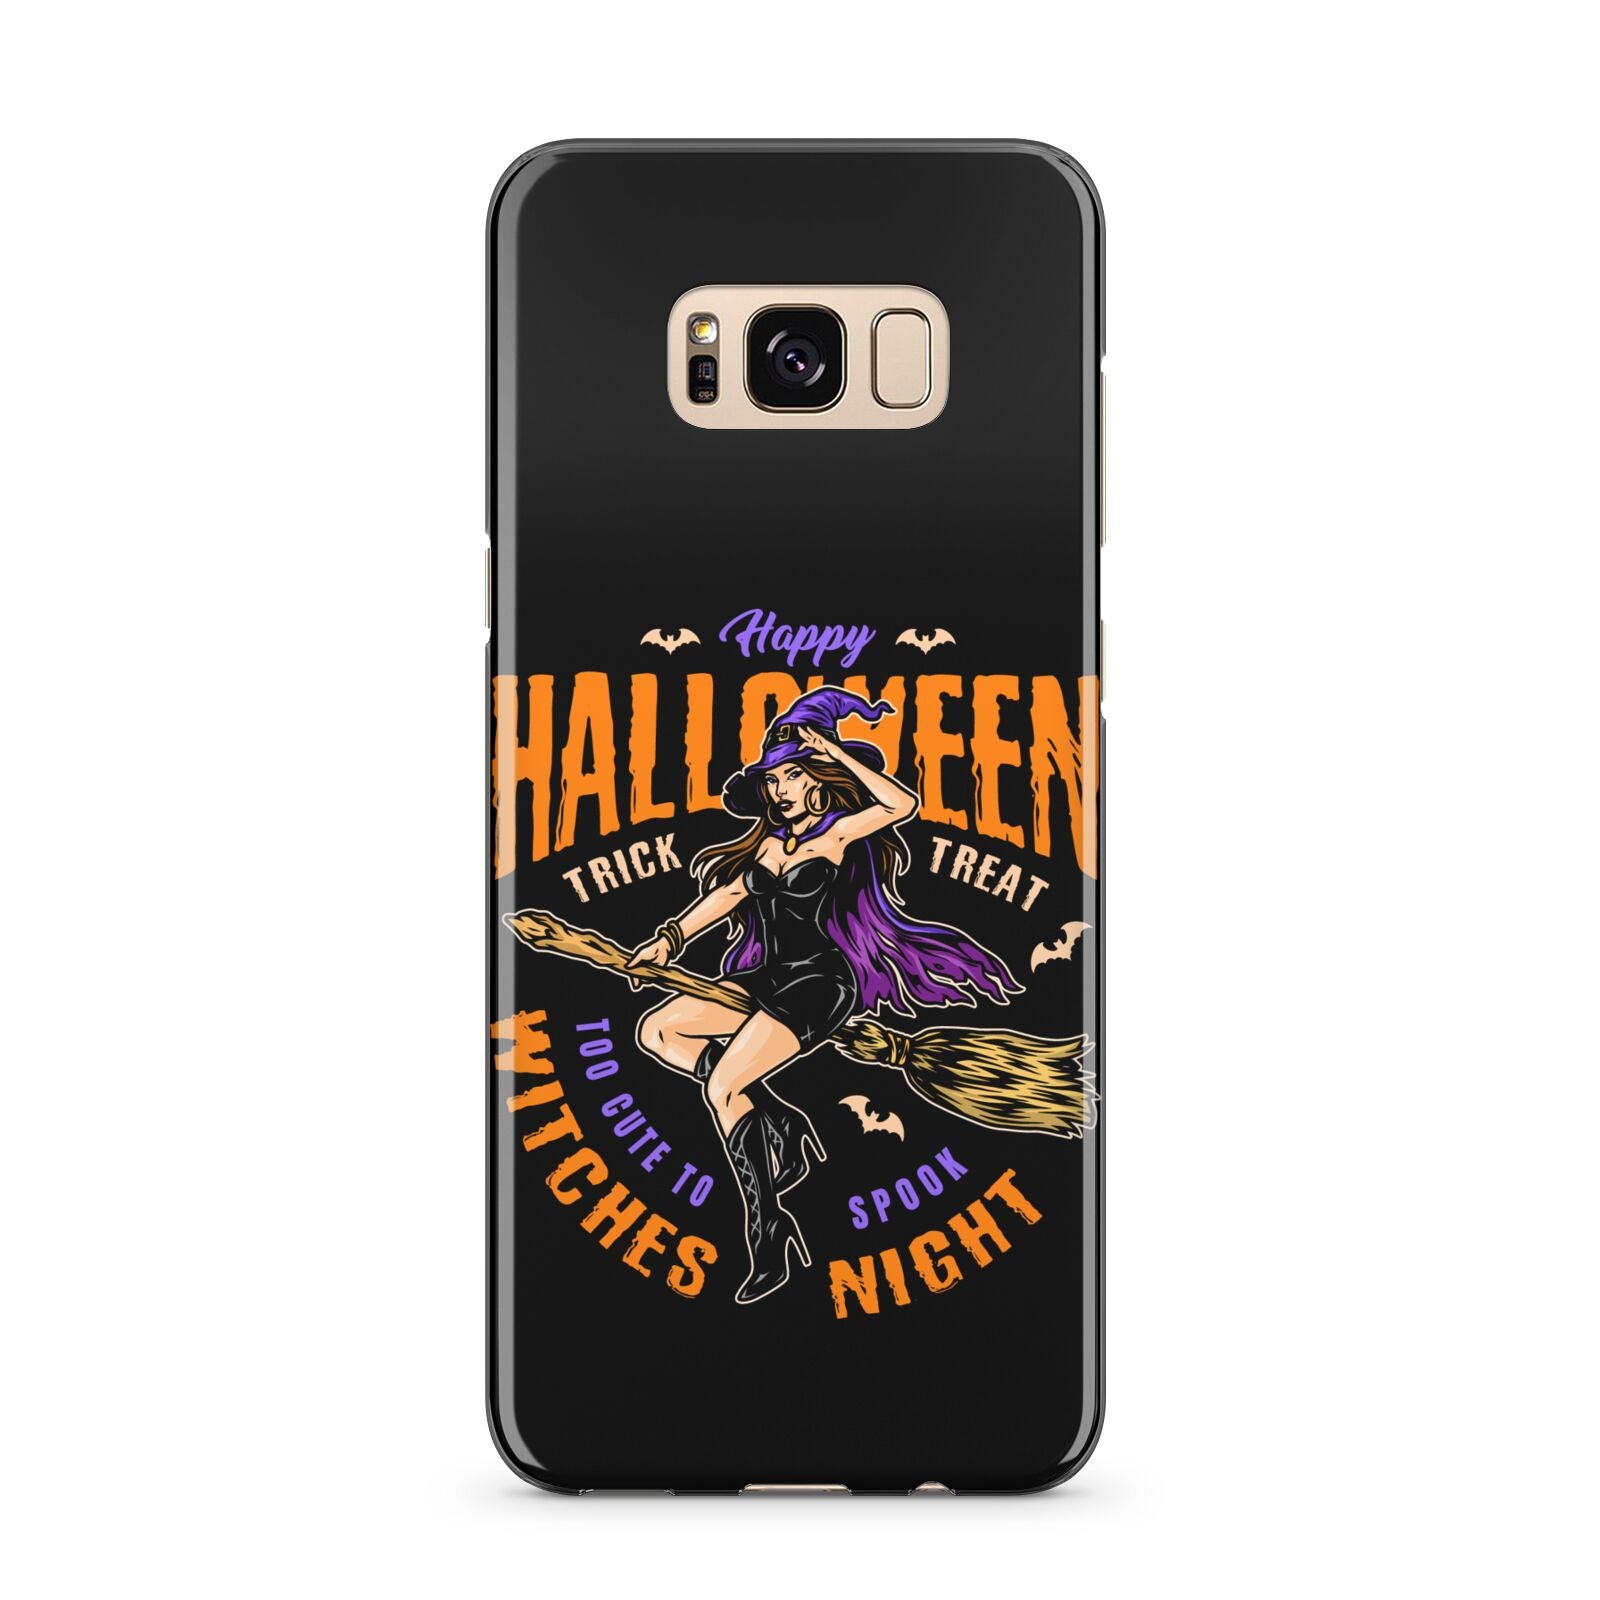 Witches Night Samsung Galaxy S8 Plus Case